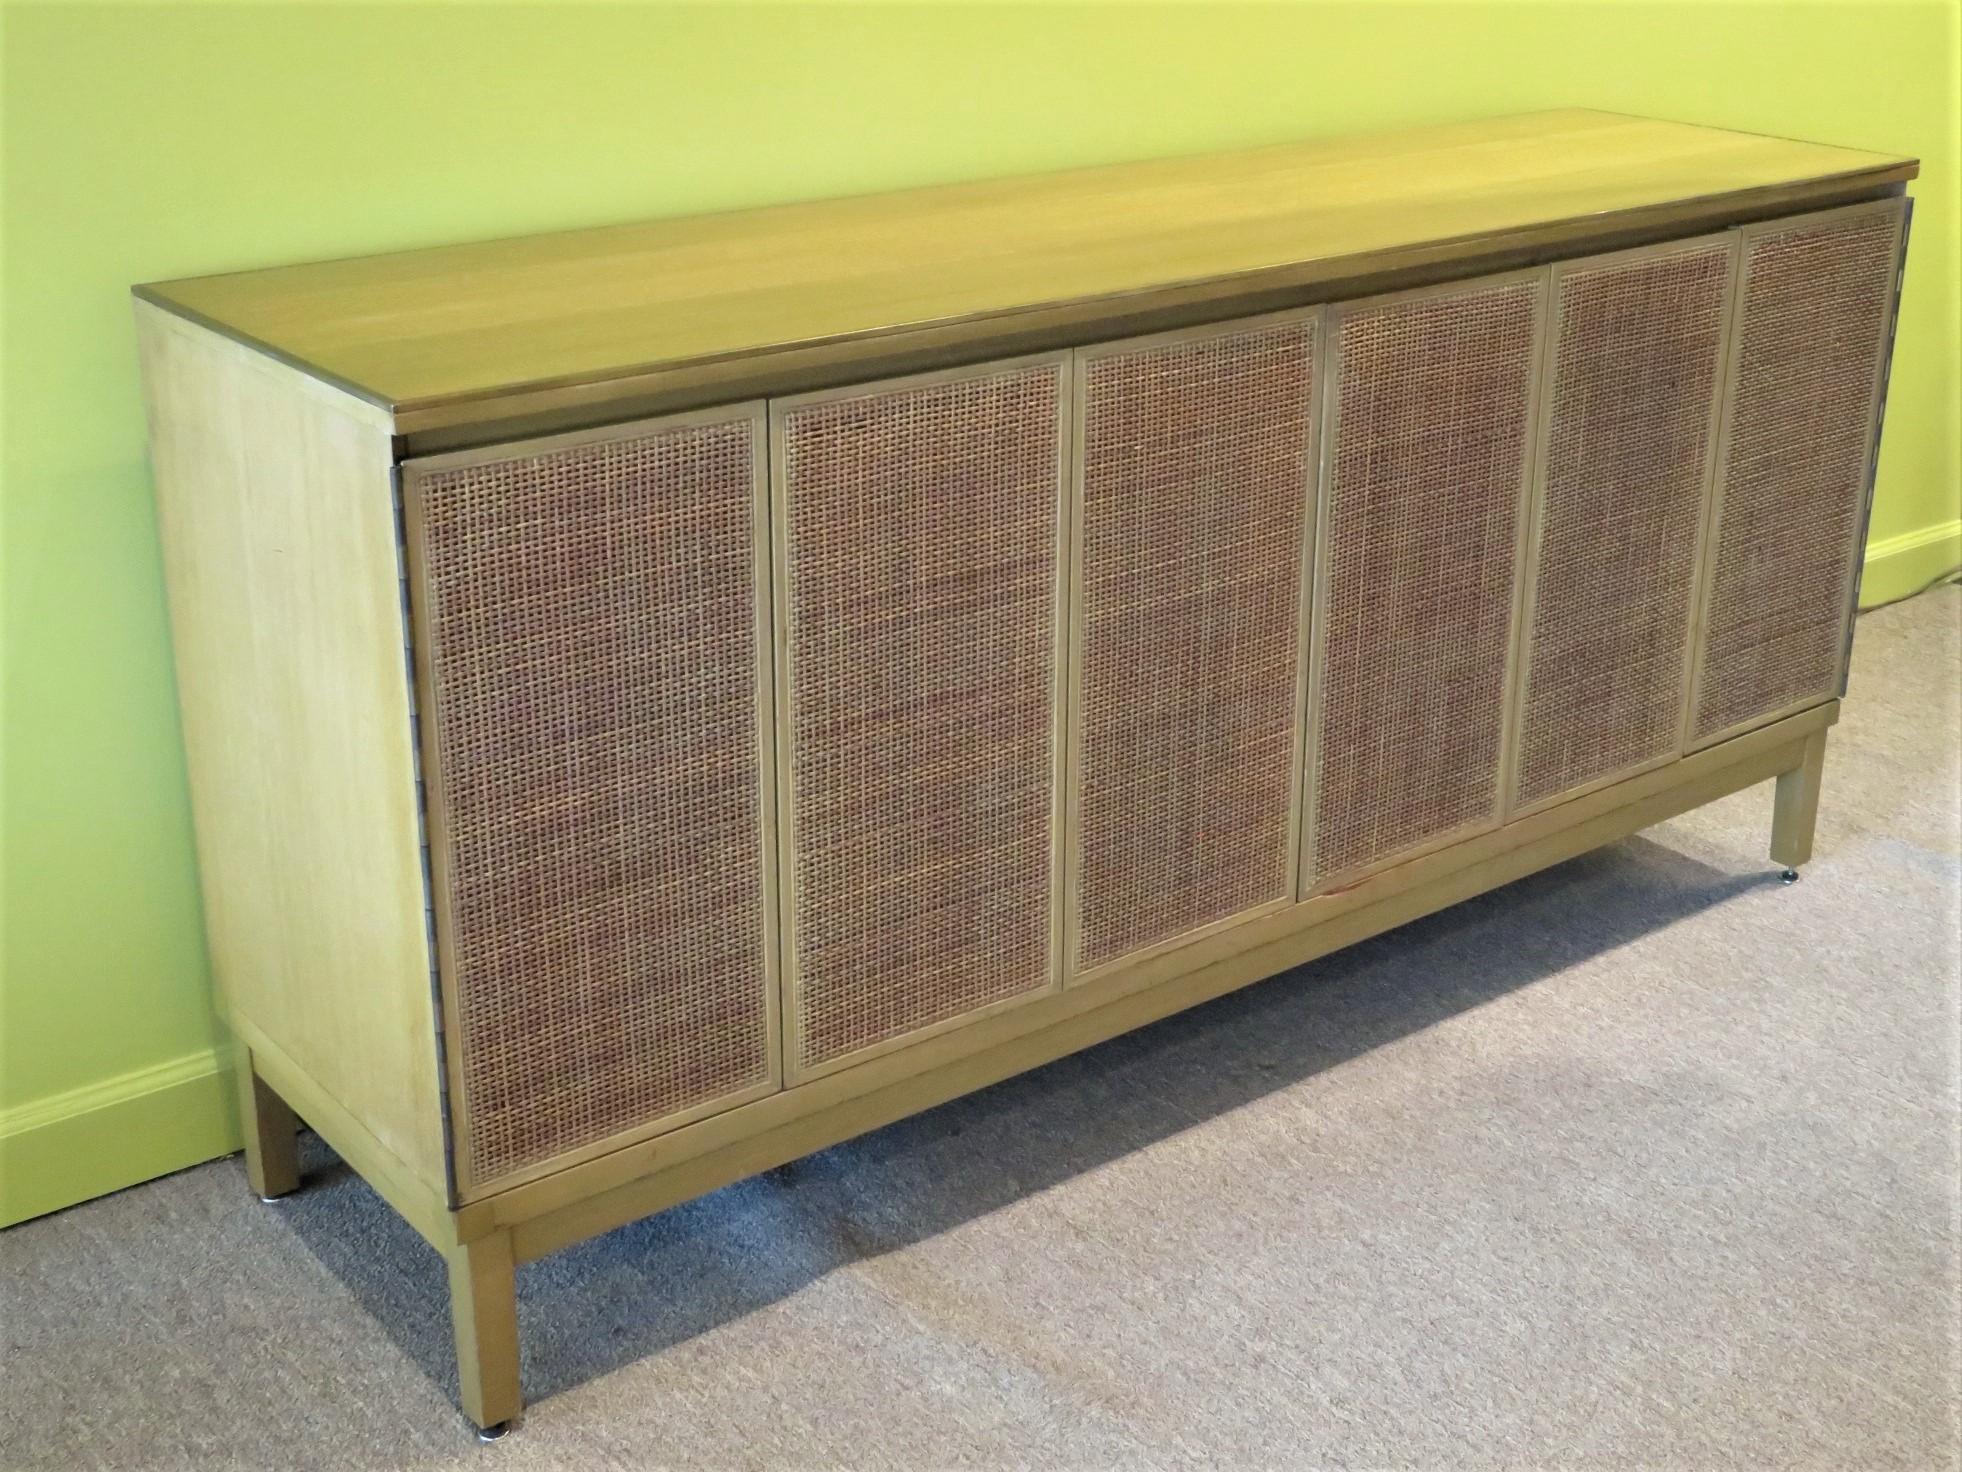 Mid-Century Modern 1950's bleached mahogany Dresser by Paul McCobb for Calvin Furniture with cane front tri-fold doors. The dresser sports a brass band around its top's edge and 8 leather lined drawers. The bleached mahogany has a golden